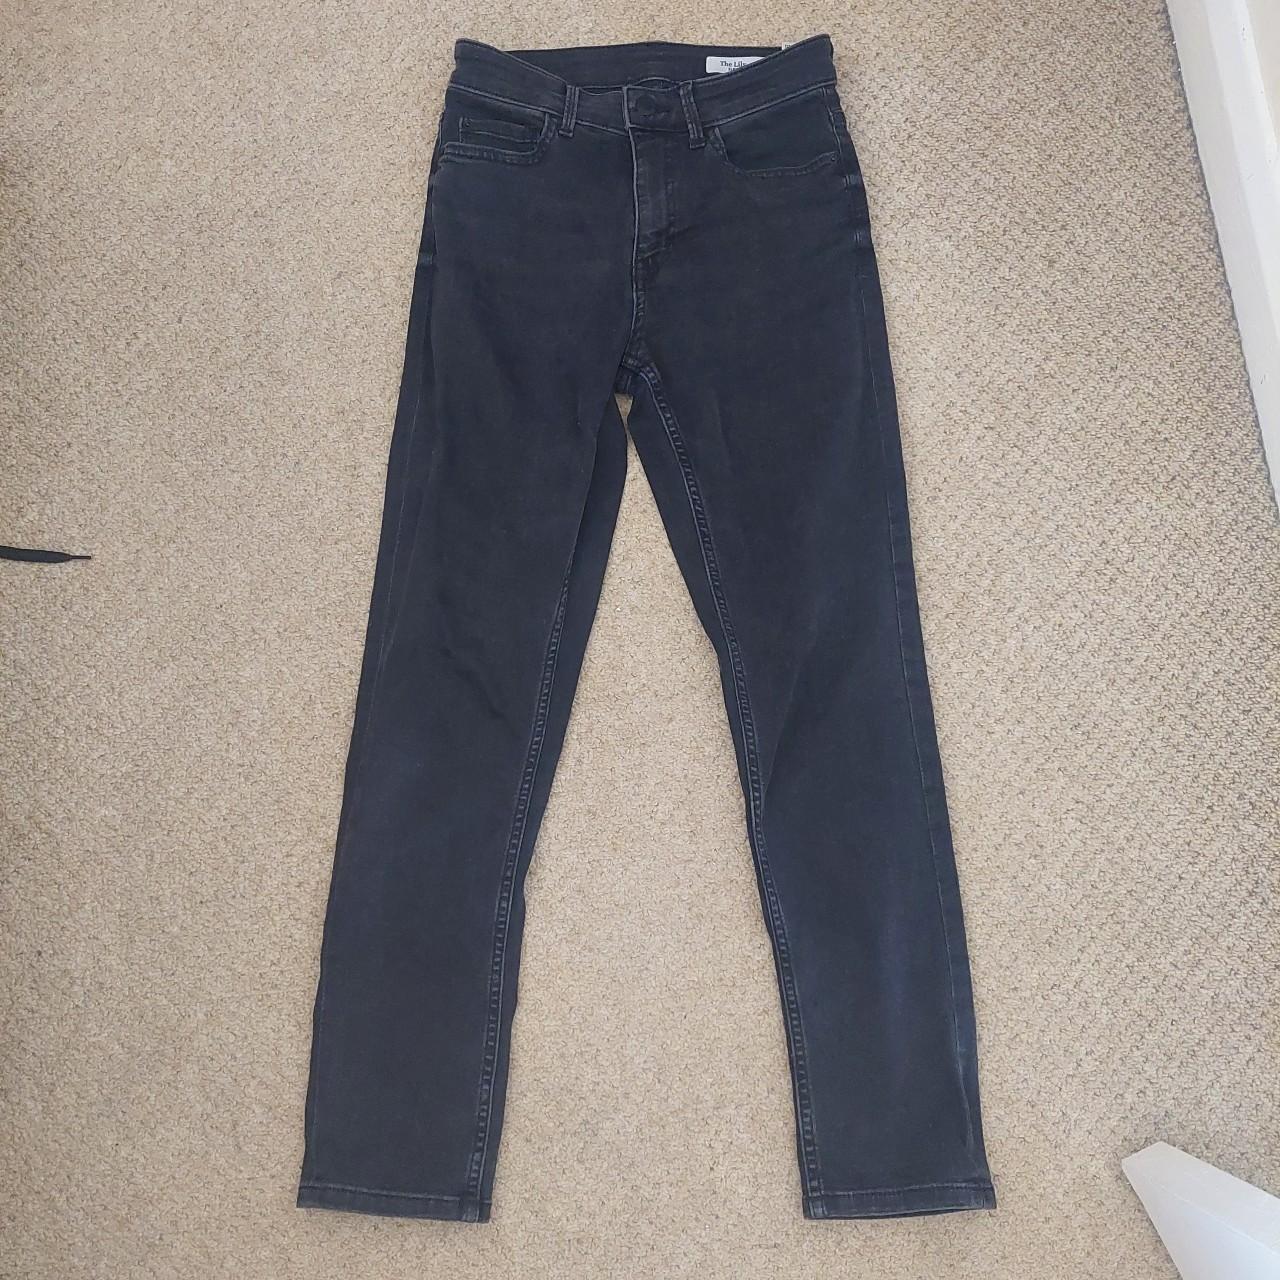 M&S lily slim jeans (relaxed skinny fit). Worn a few... - Depop